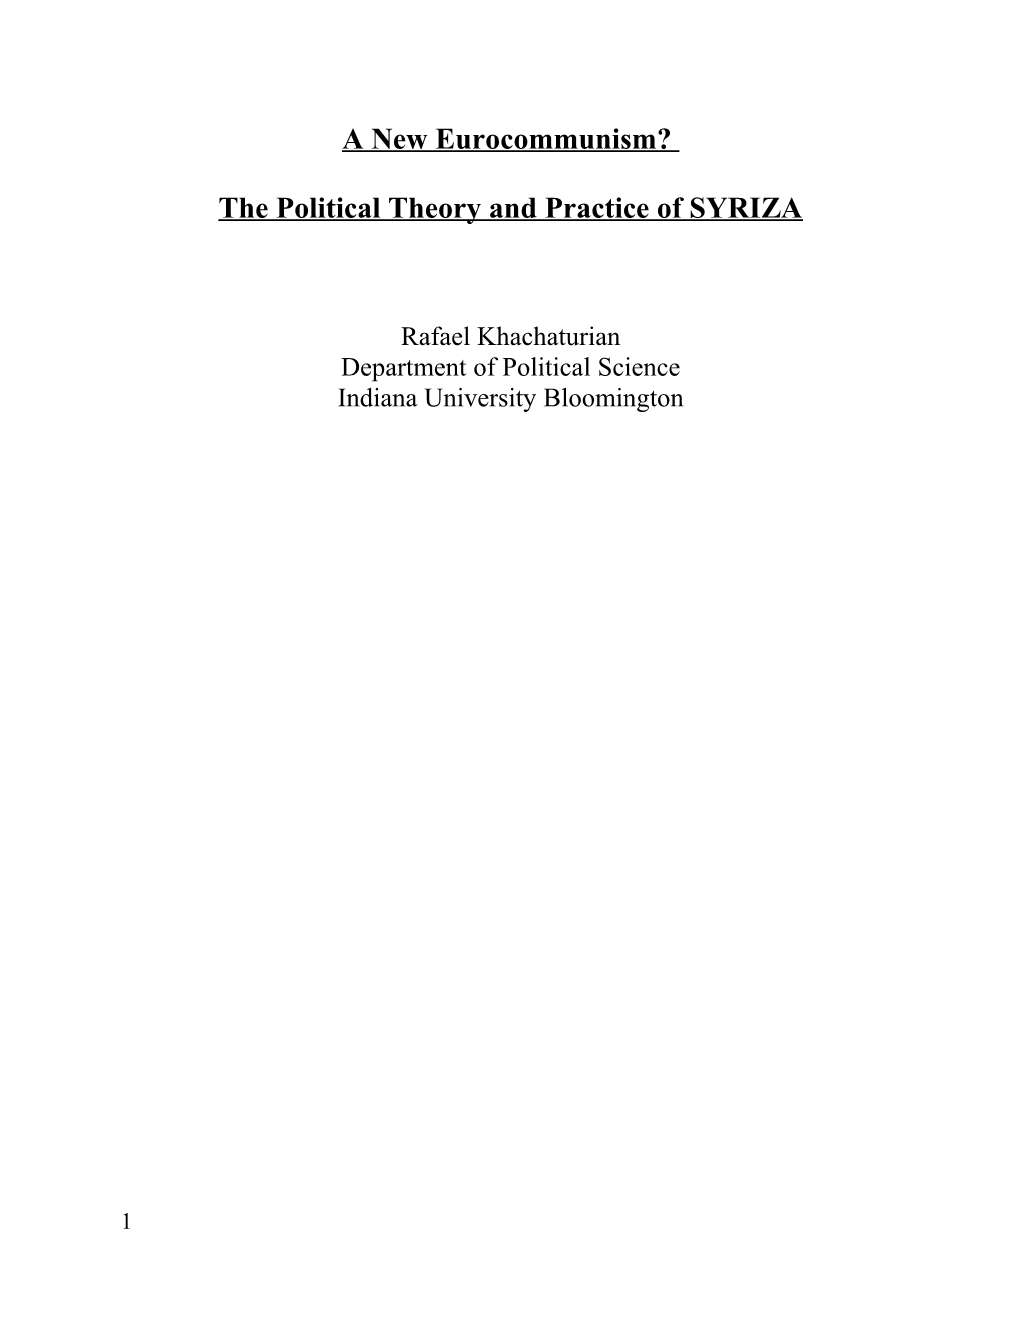 The Political Theory and Practice of SYRIZA